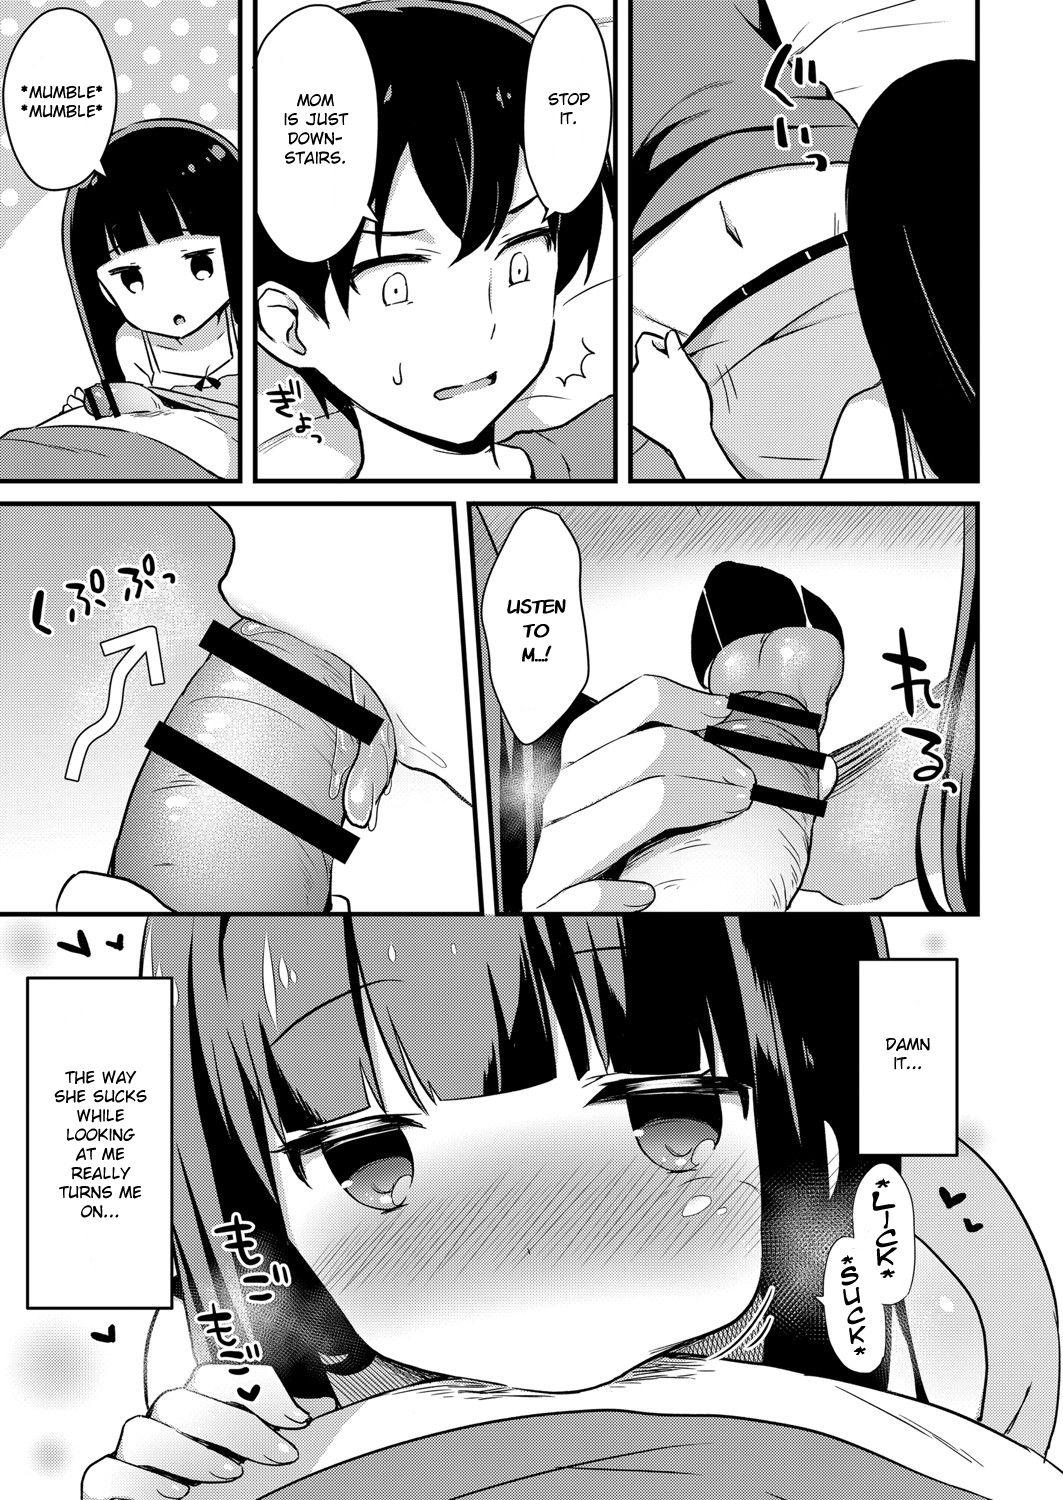 Lesbos [Tiger] Yuuwaku・Imouto #2 Onii-chan wa seishori gakari | Little Sister Temptation #2 Onii-chan is in Charge of My Libido Management (COMIC Reboot Vol. 07) [English] [Digital] Fat Pussy - Page 9